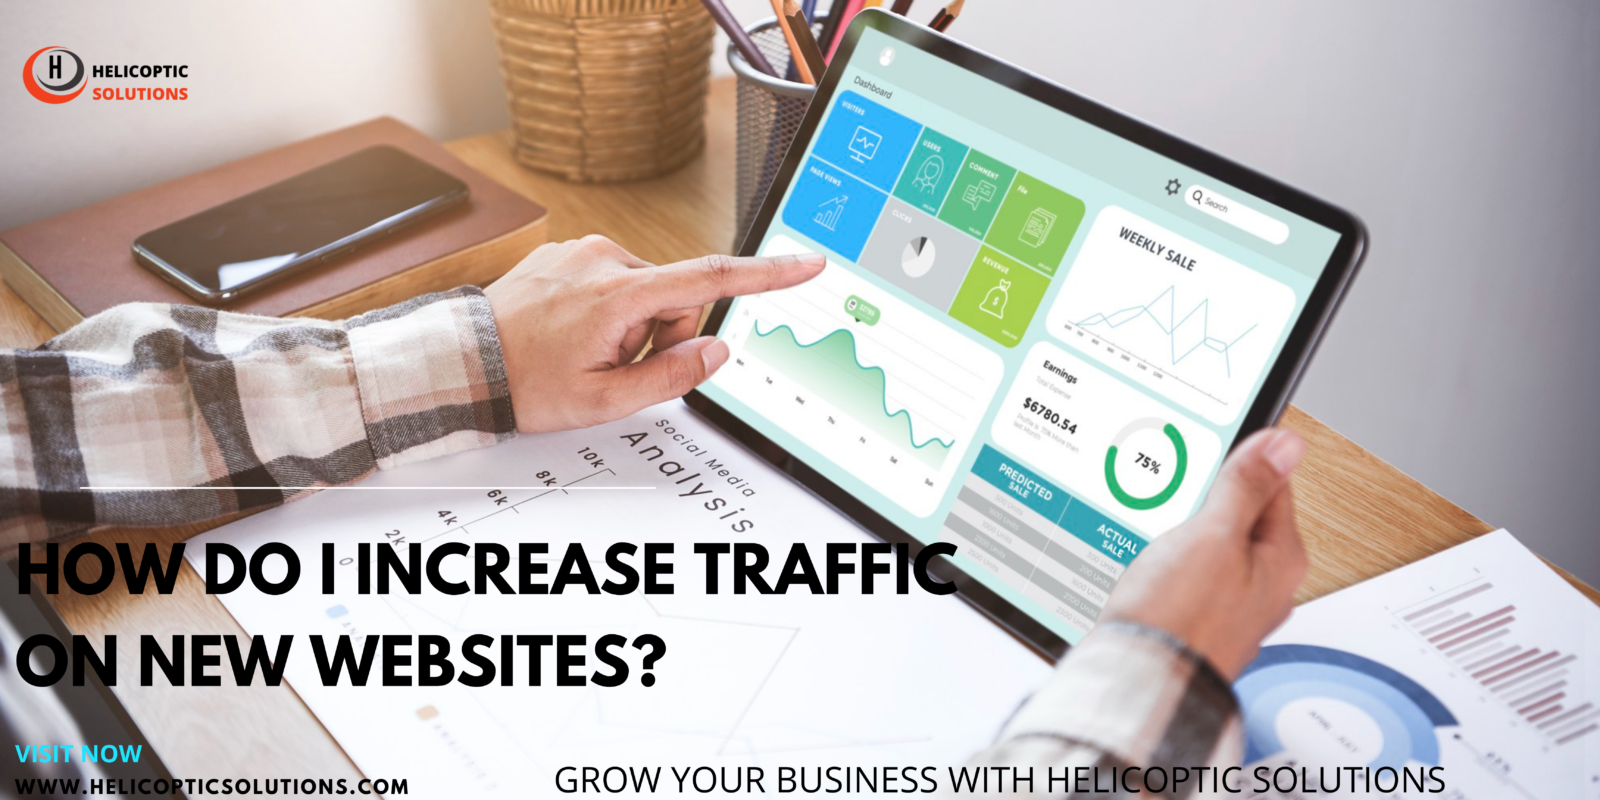 How do I increase traffic on new websites?